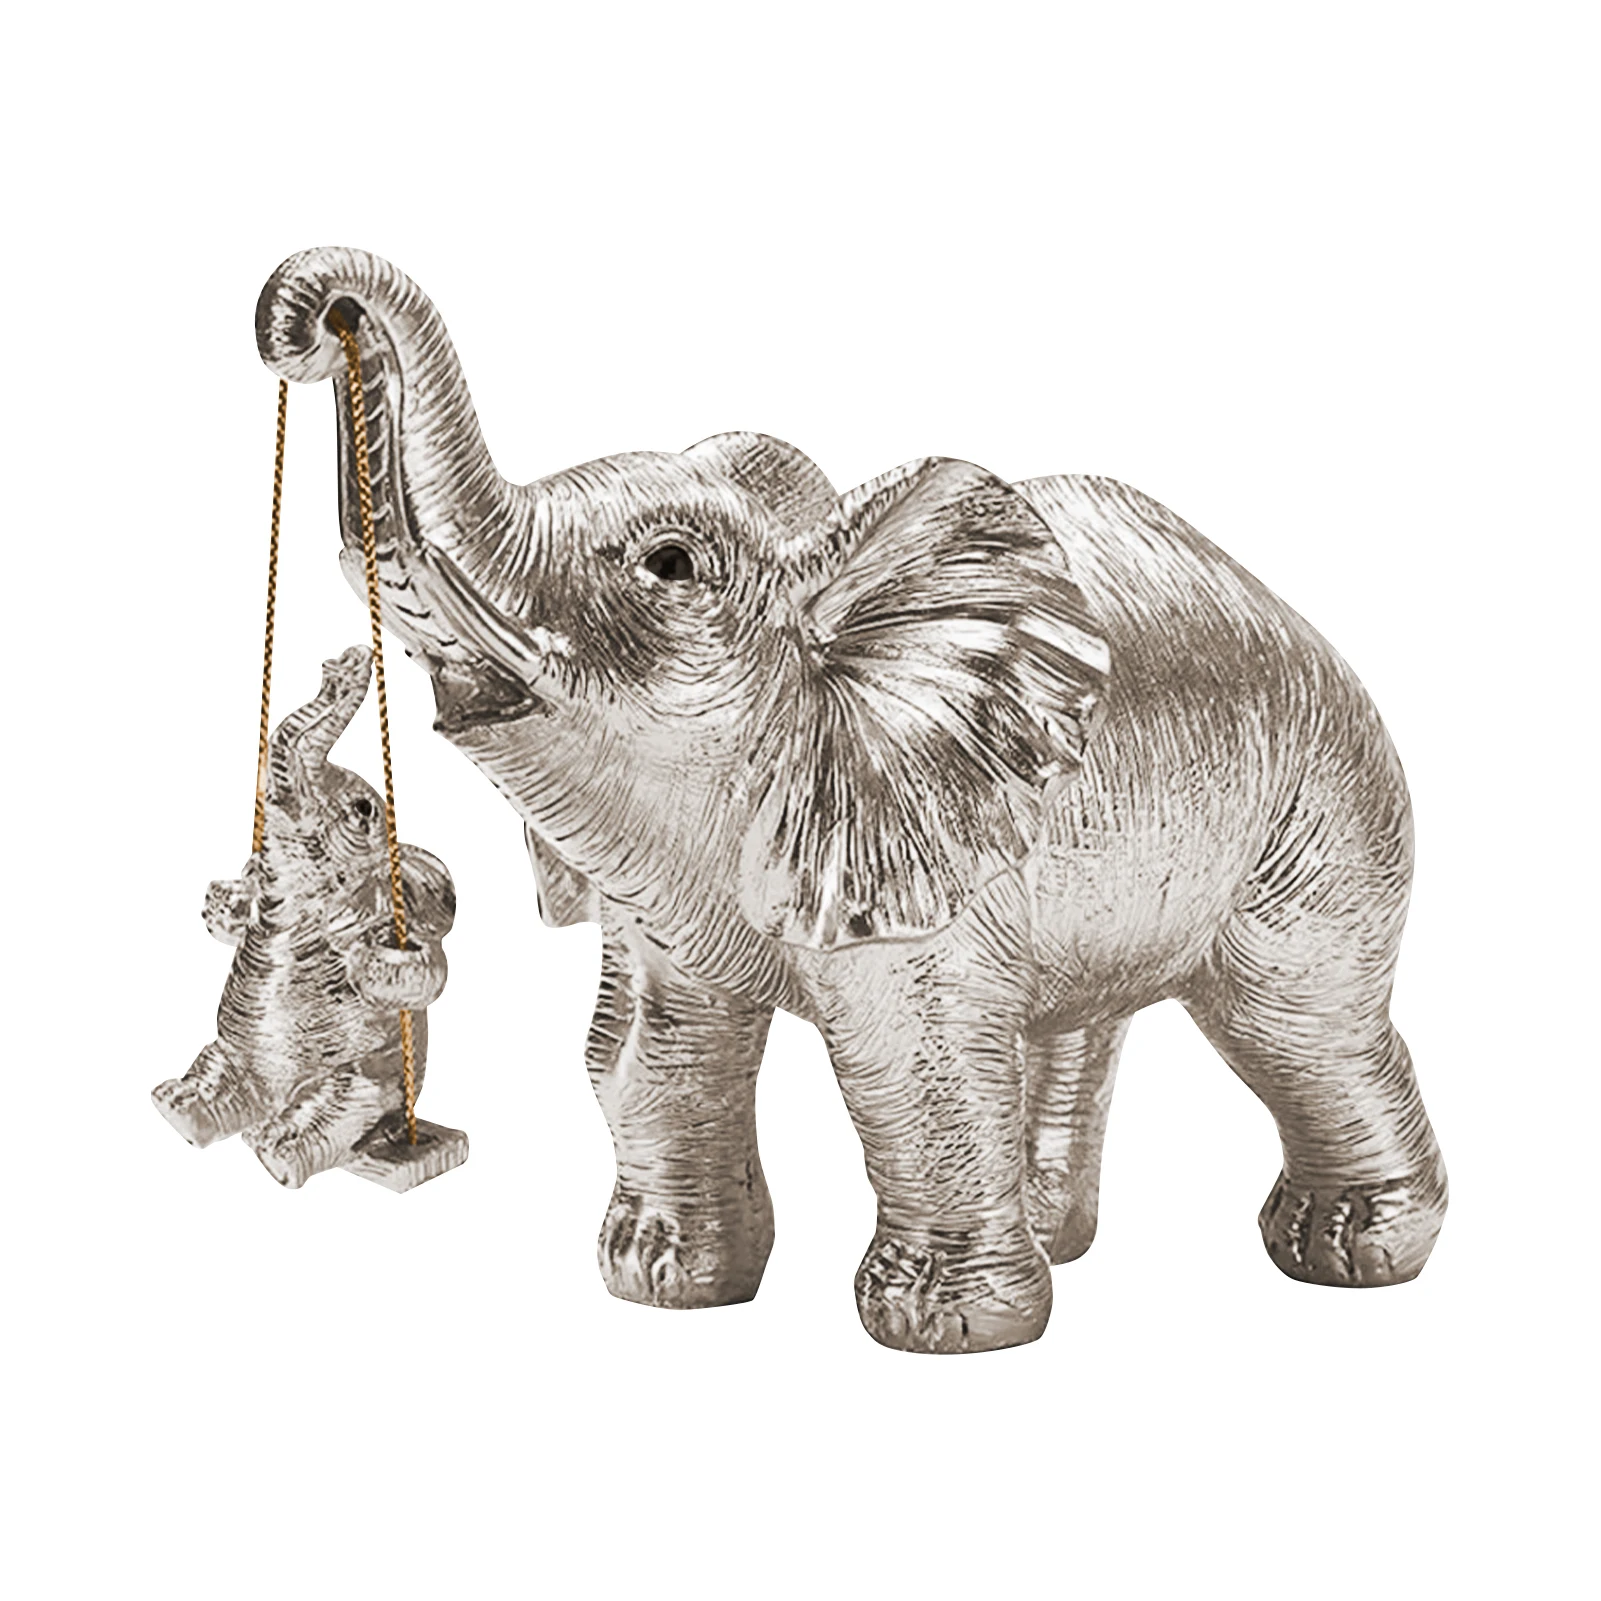 

Home Decor For Bookshelf Office Living Room Collectible Figurine Good Luck Mom Gifts Modern Animal Elephant Statue Ornament